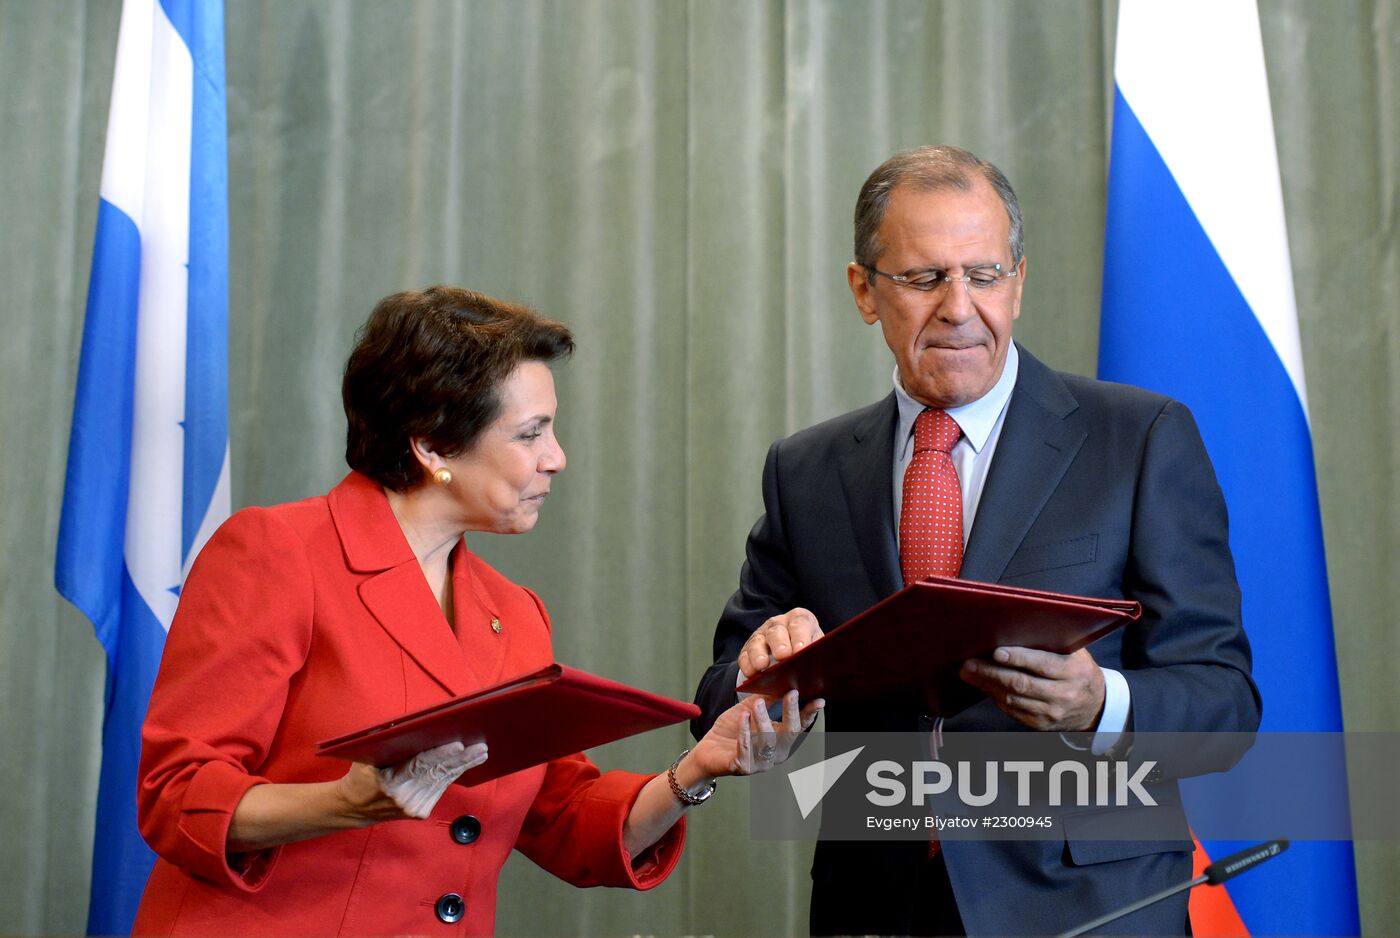 Foreign ministers of Russia and Honduras meet in Moscow